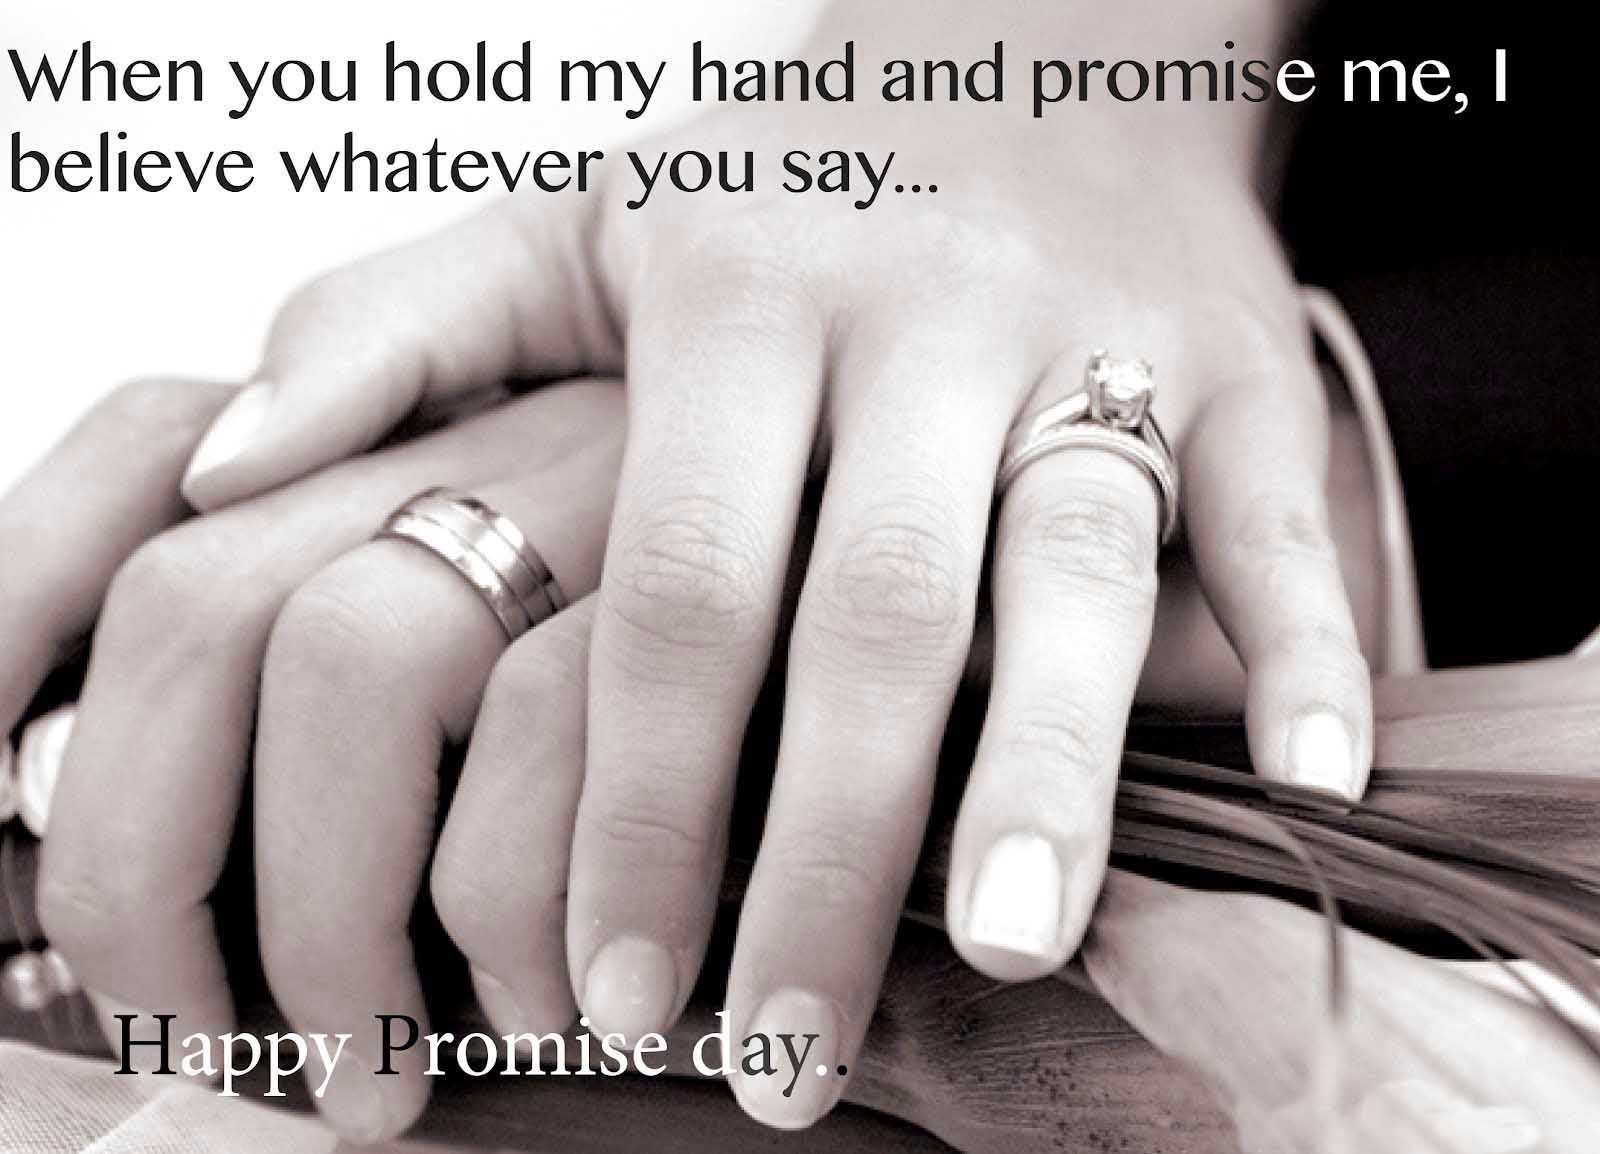 When You Hold My Hand And Promise Me, I Believe Whatever You Say Happy Promise Day Wallpaper